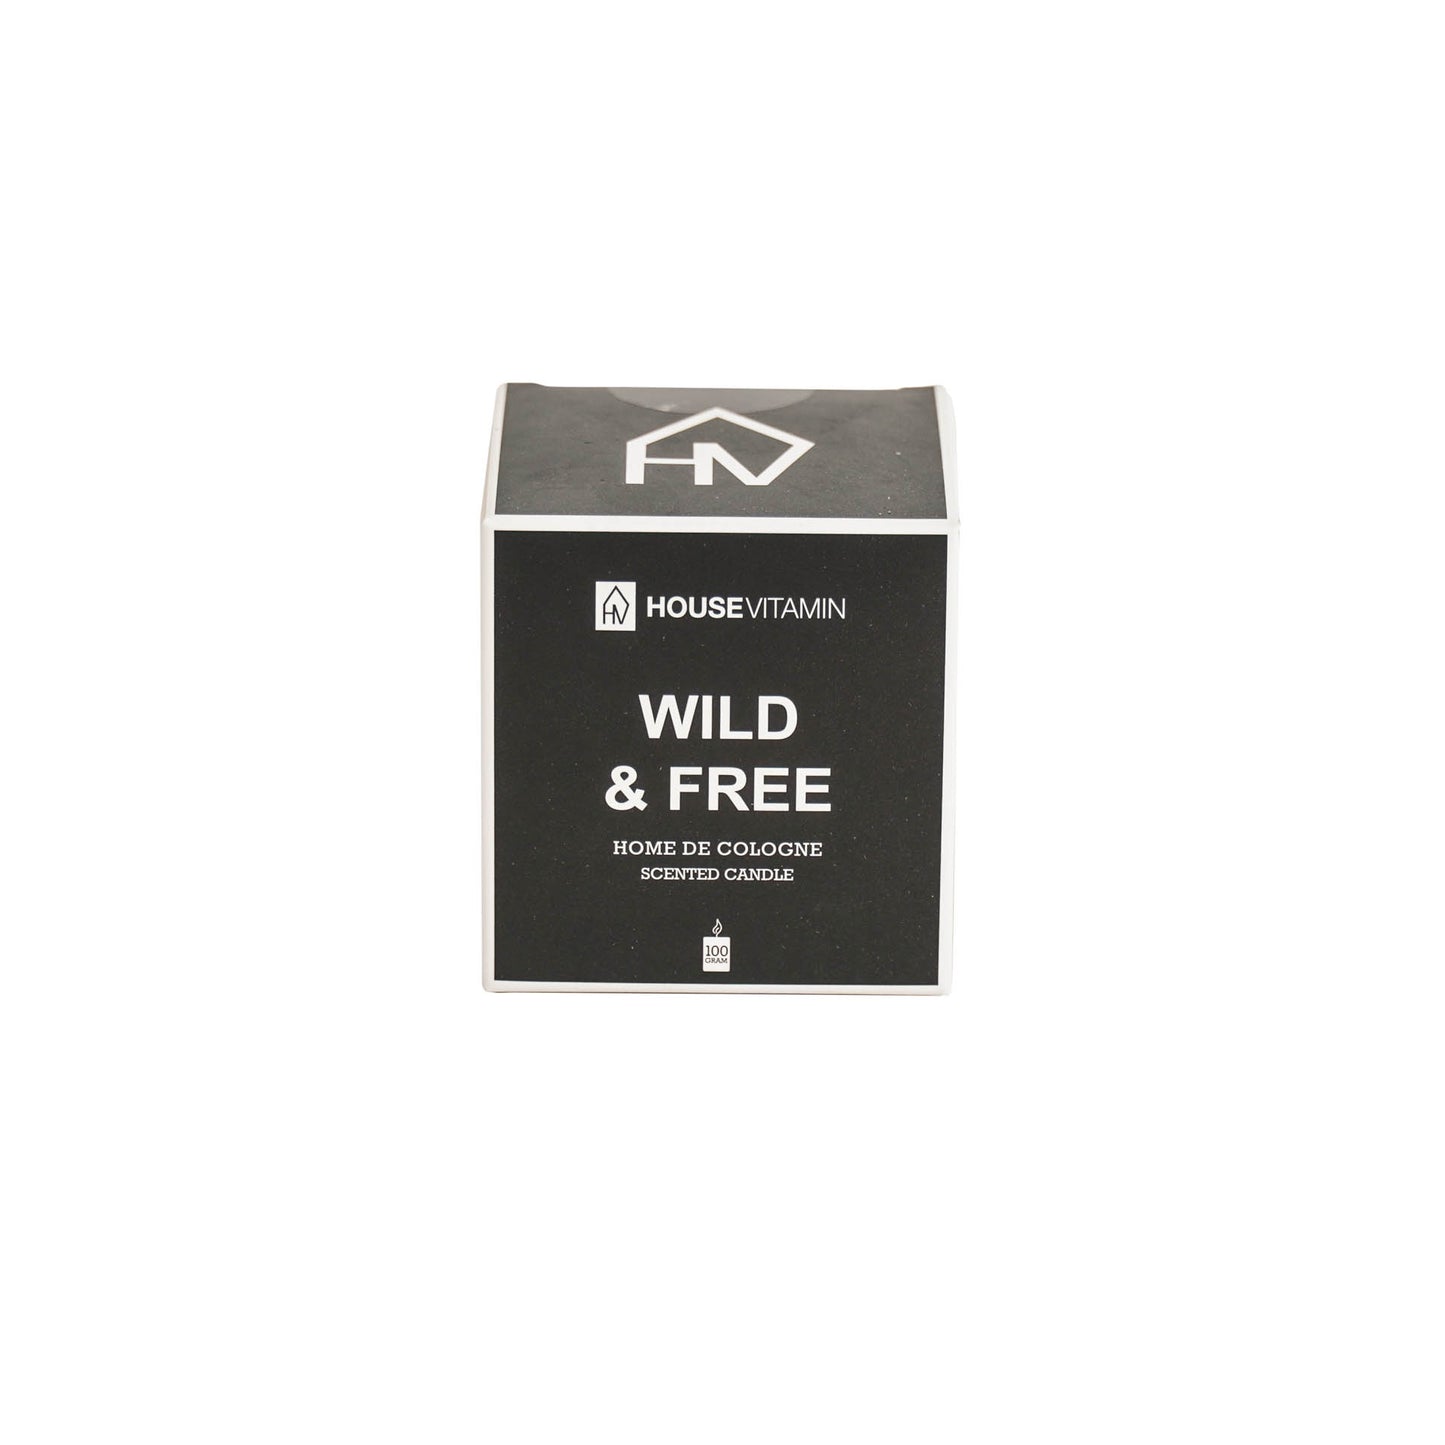 Housevitamin Home de Cologne Geurkaars - 100gr - Wild and free